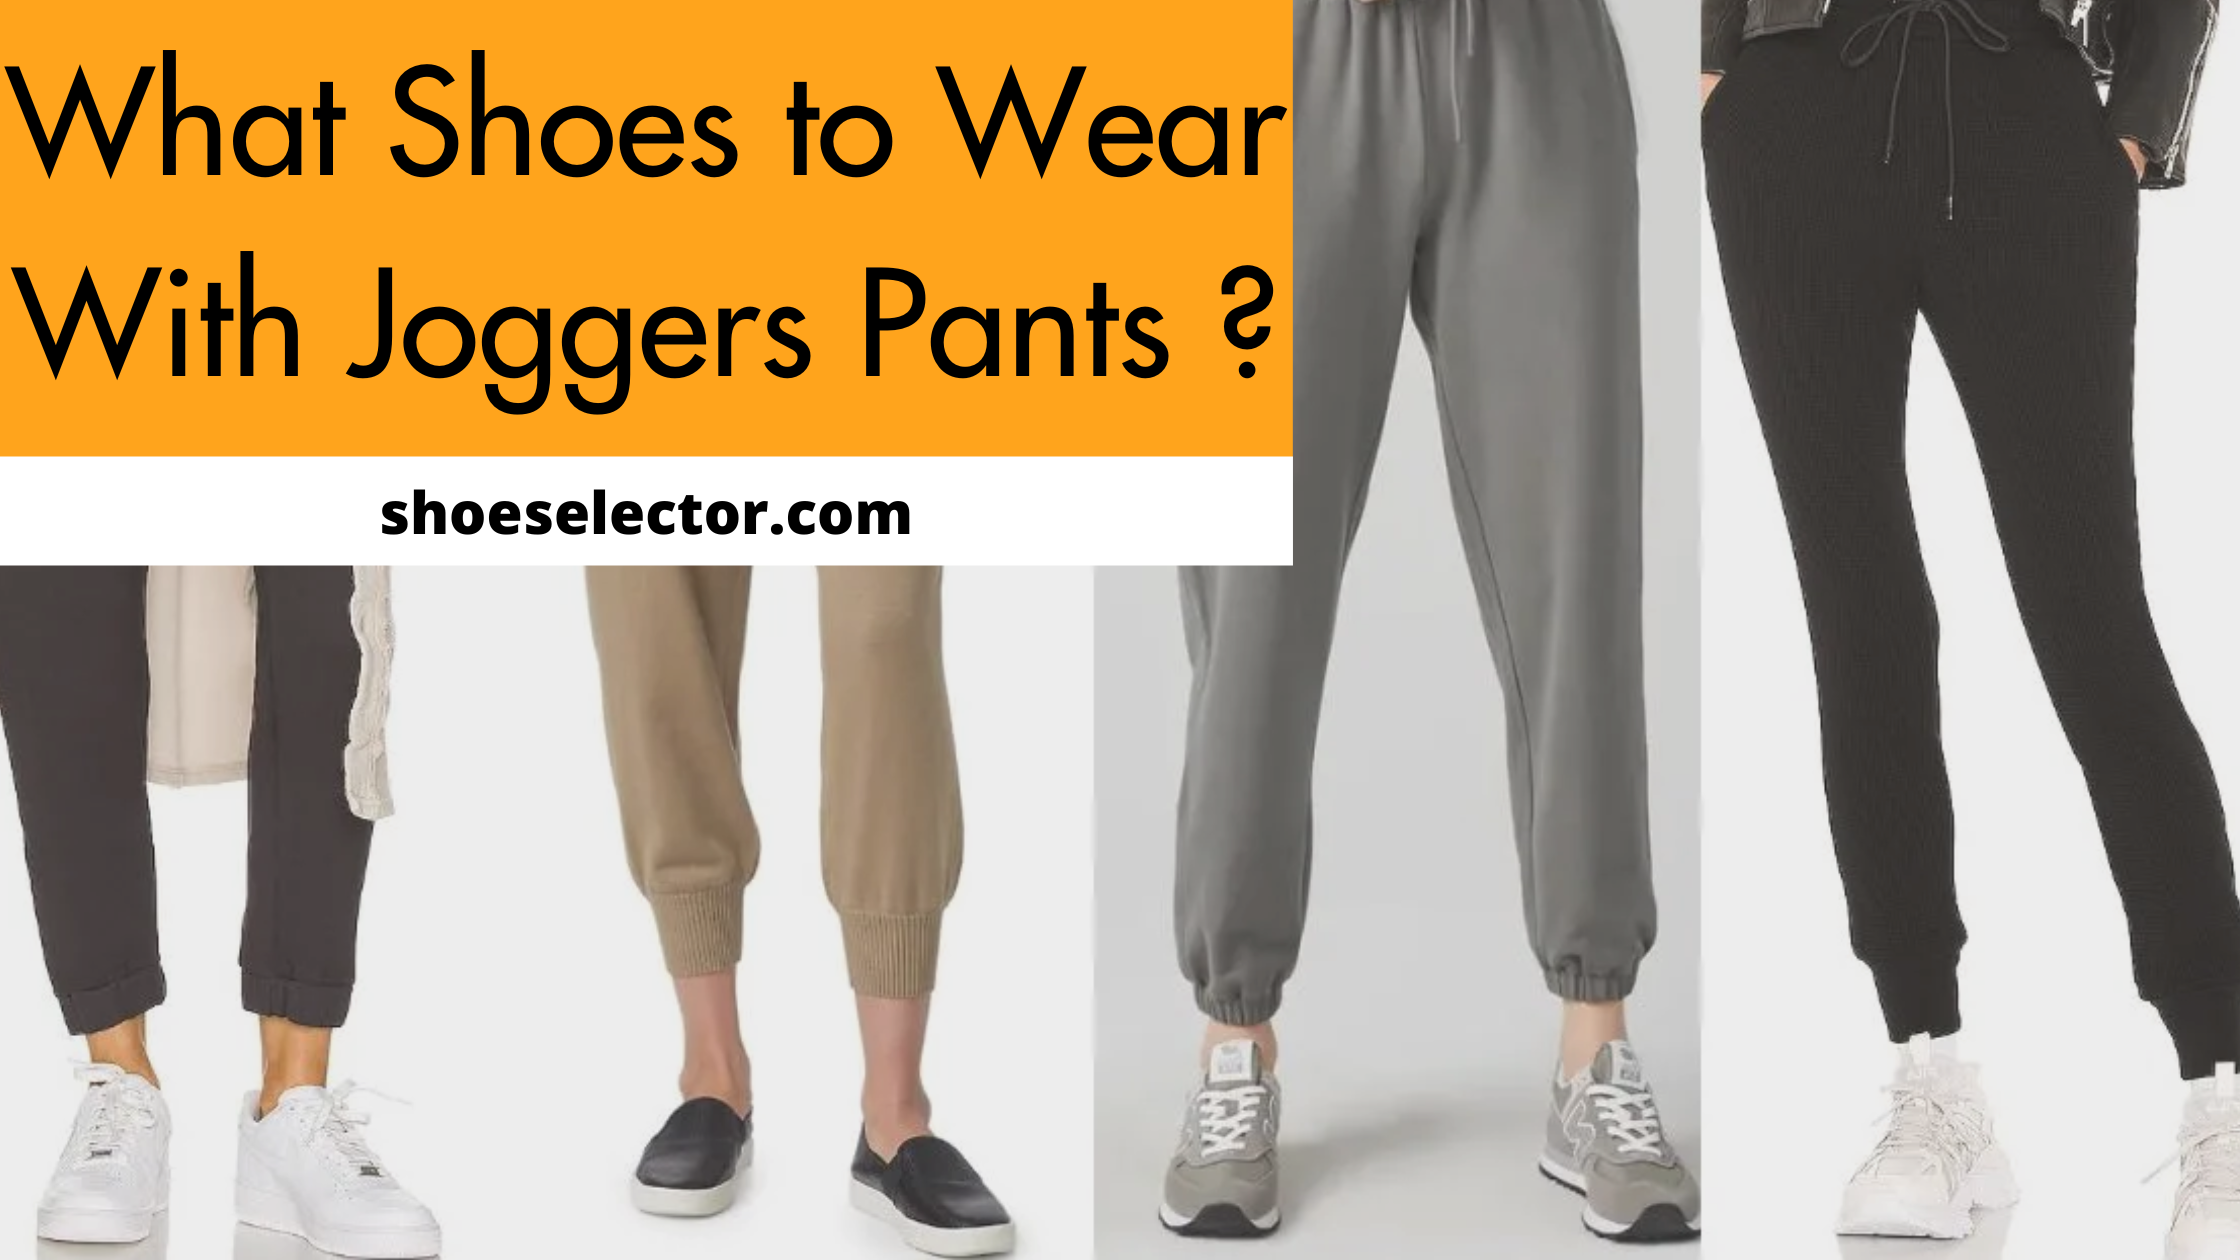 What Shoes To Wear With Joggers Pants? - Latest Guide